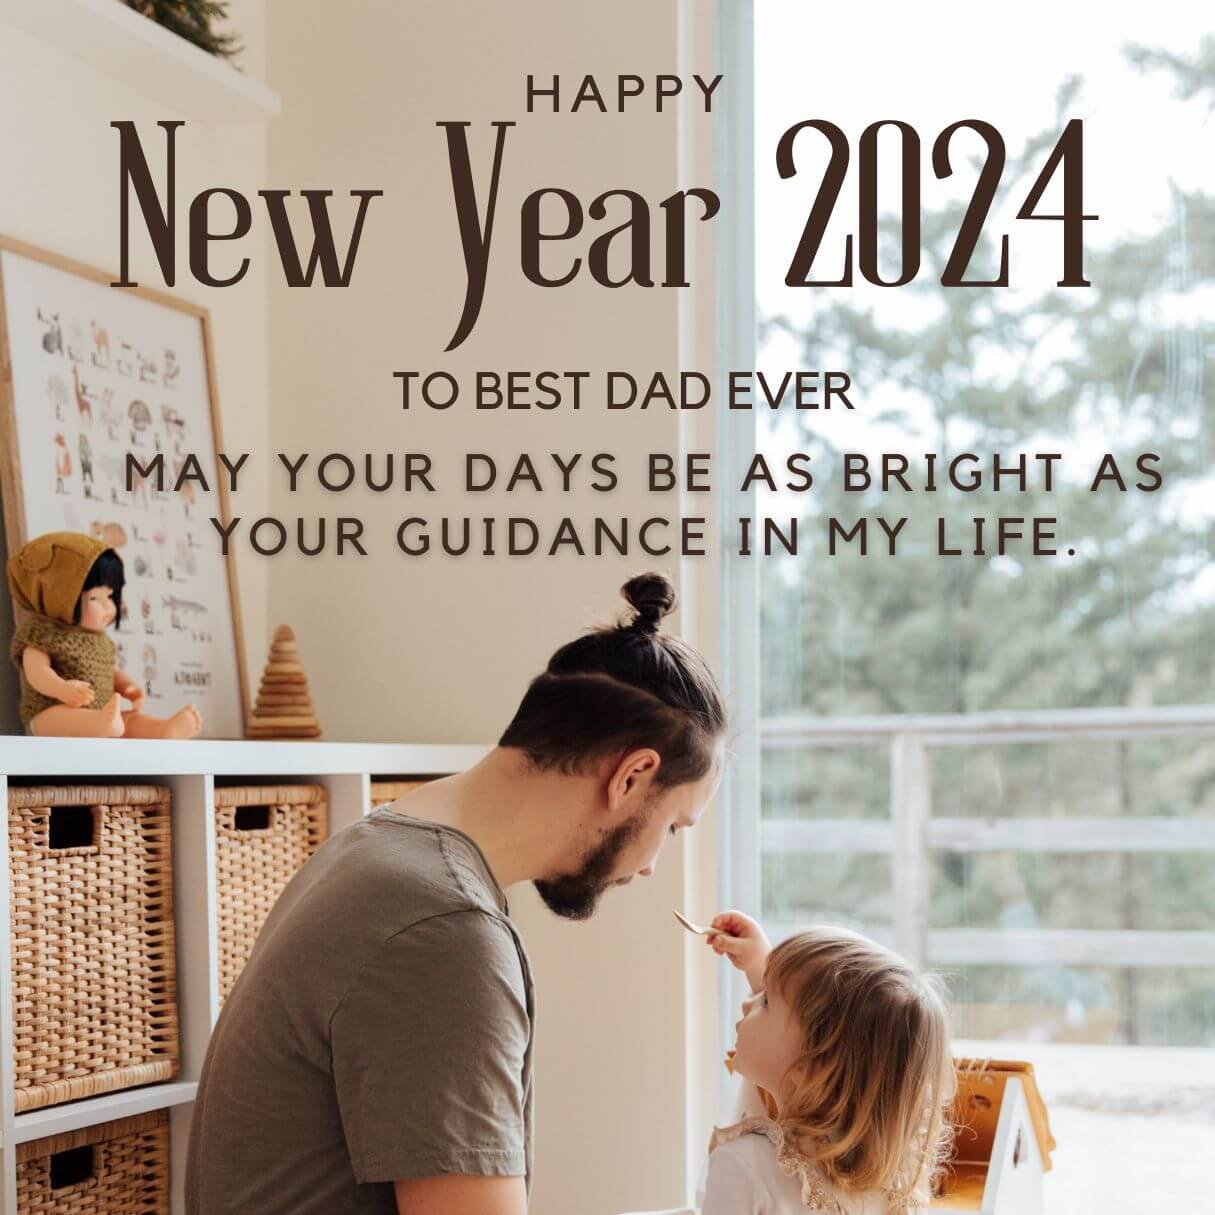 Happy New Year Wishes 2024 For Dad From Daughter